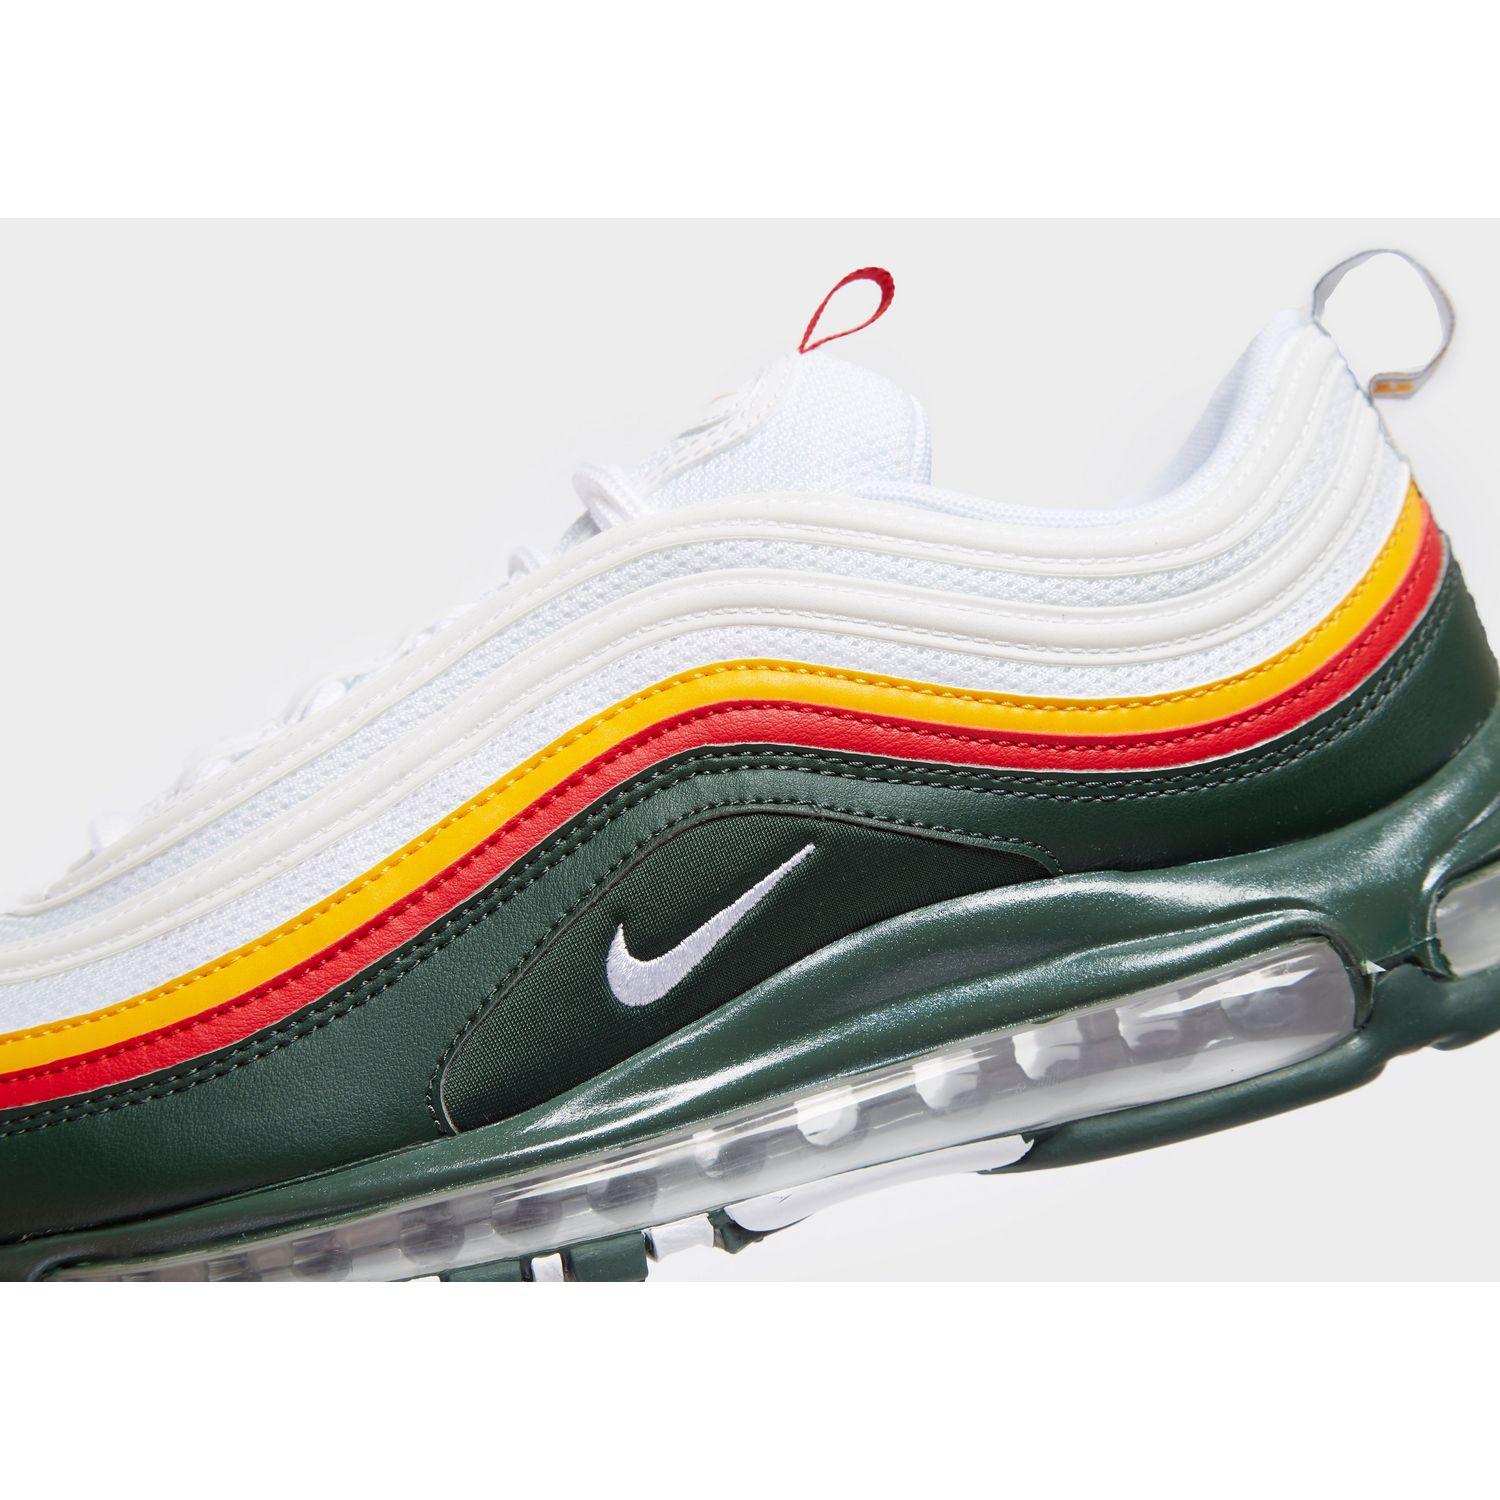 air max 97 red green yellow